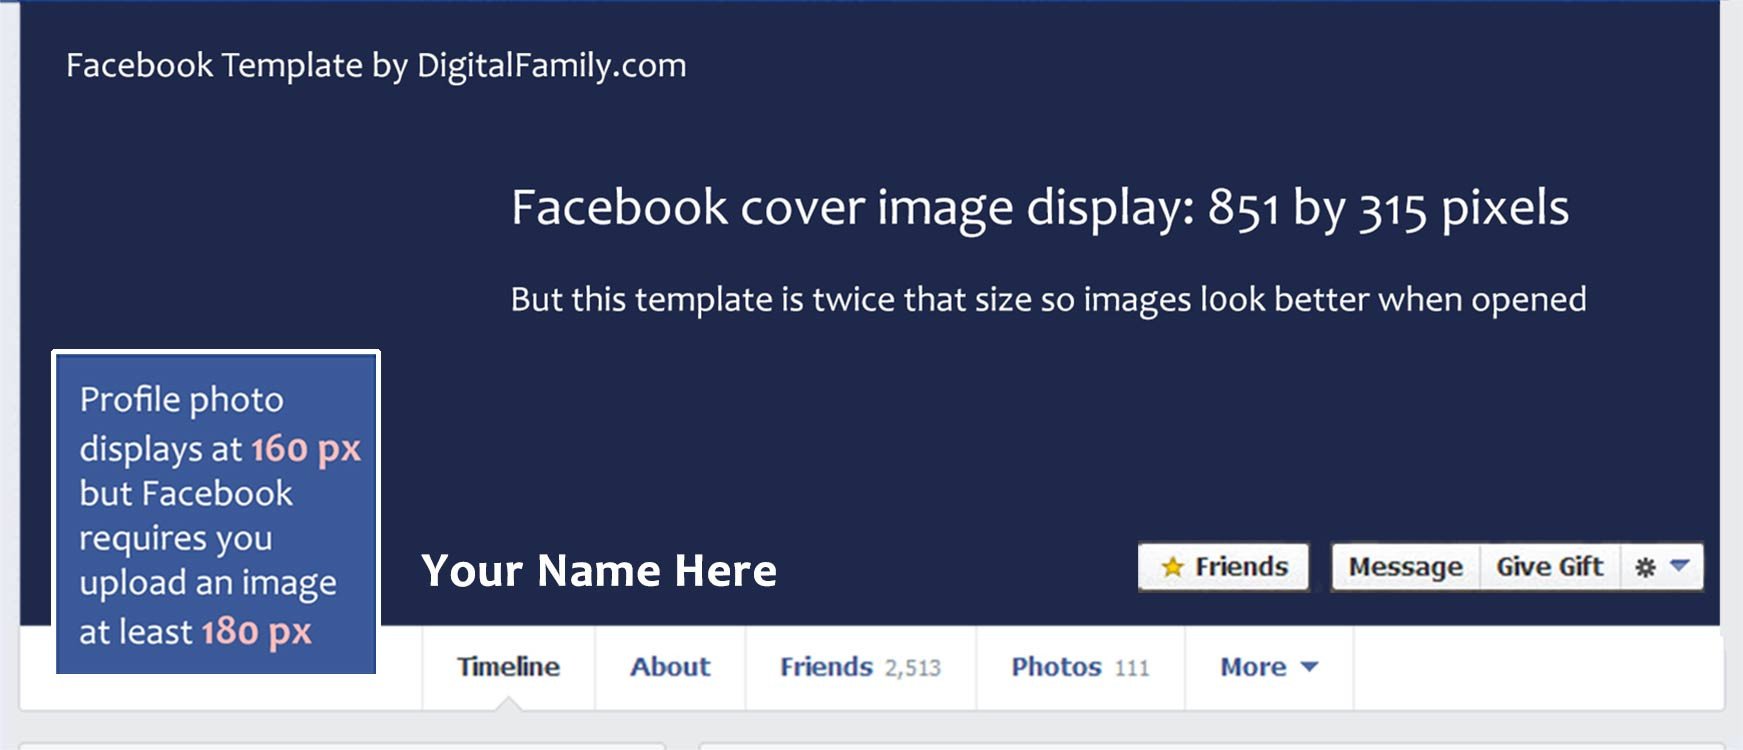 Free Facebook Covers Templates My Free Template is Twice the Size Re Mends